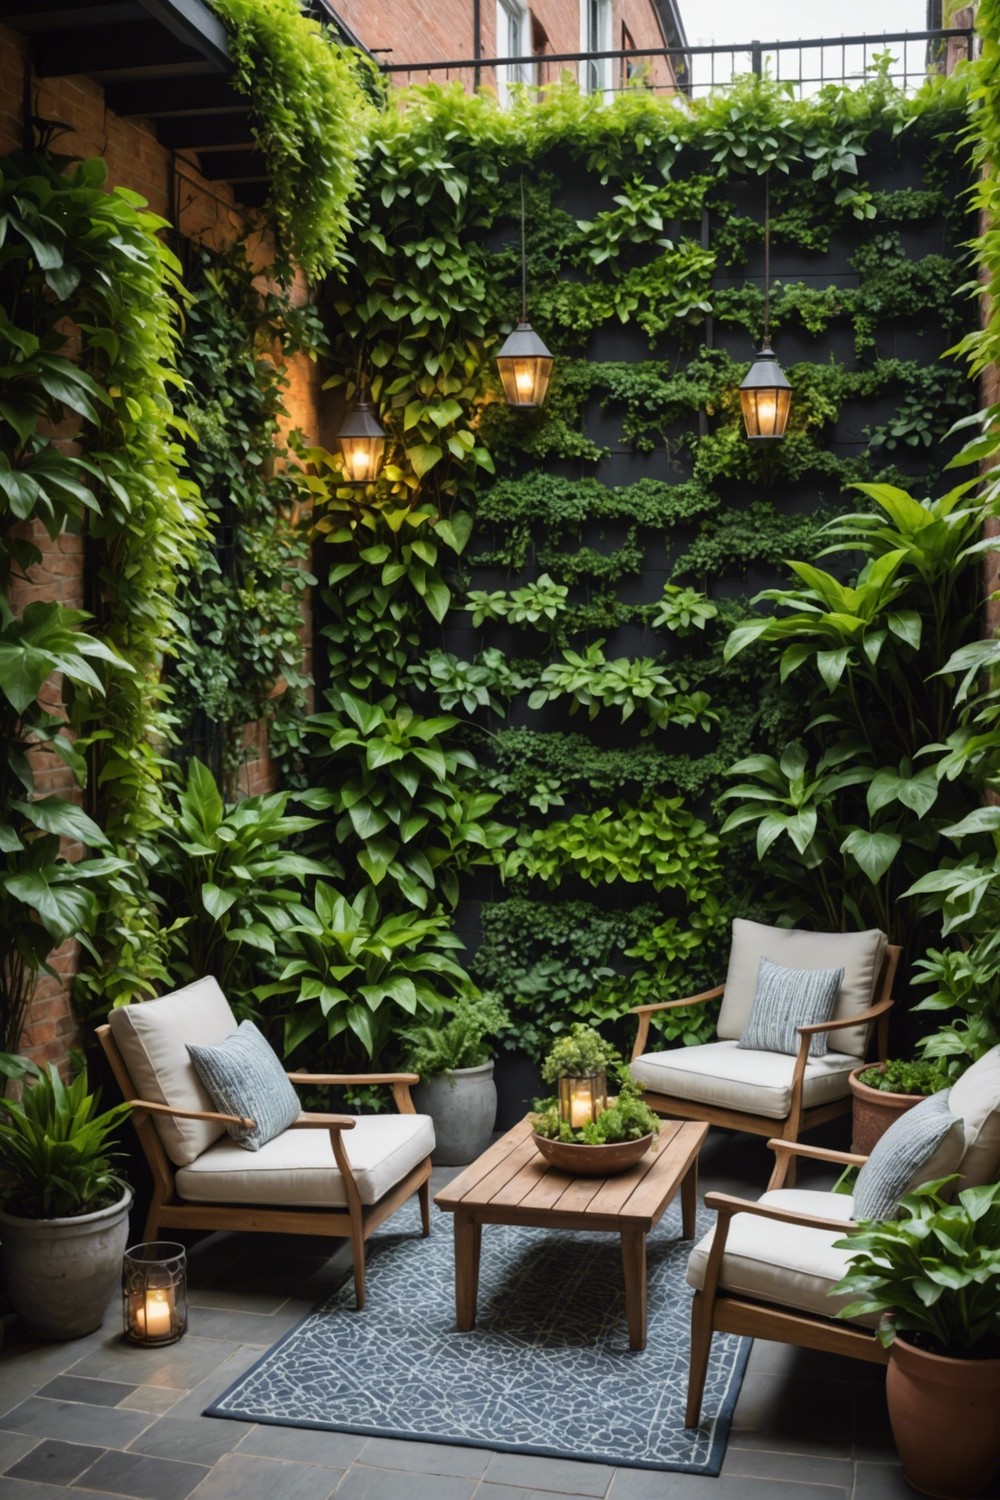 Greenery Galore for a Lush Look